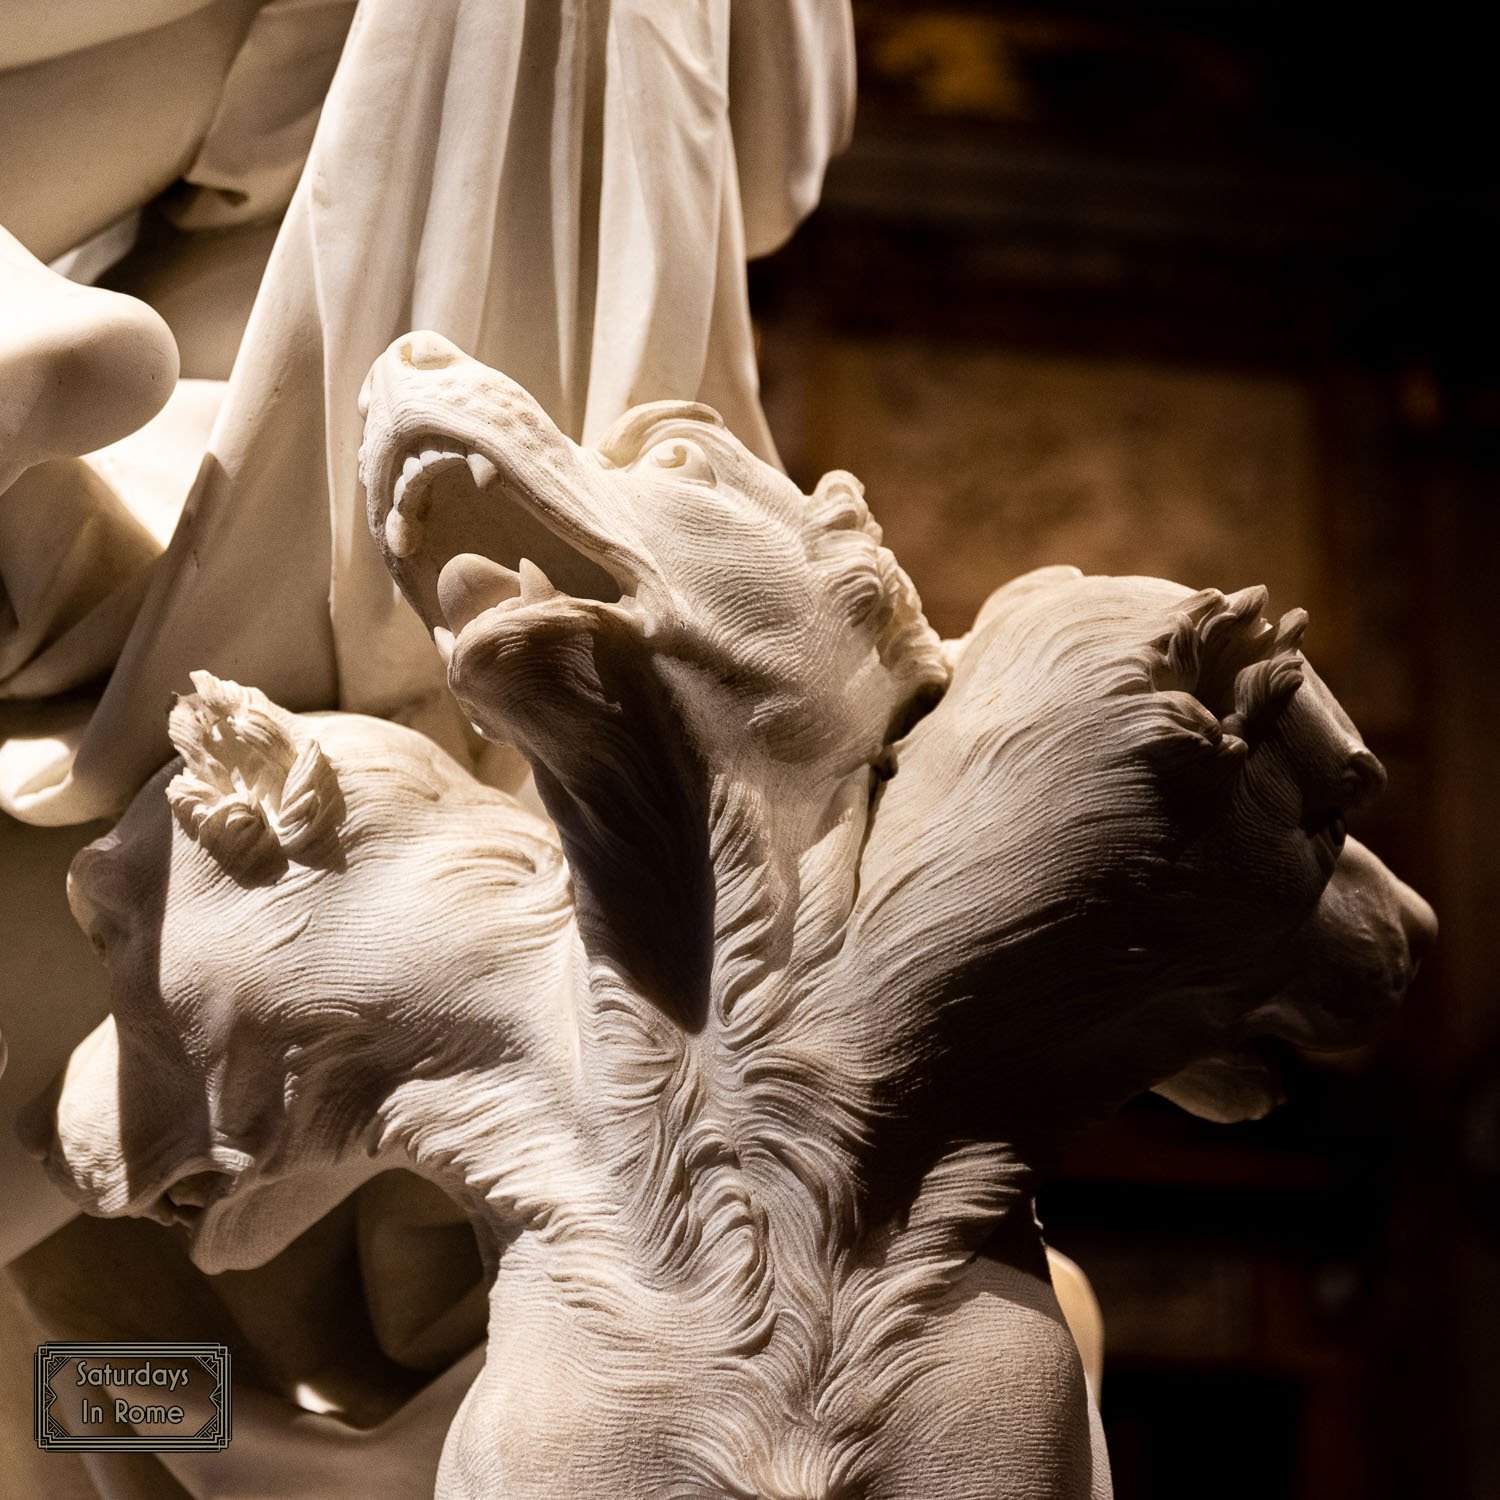 borghese gallery and museum - Bernini's the Rape of Proserpina